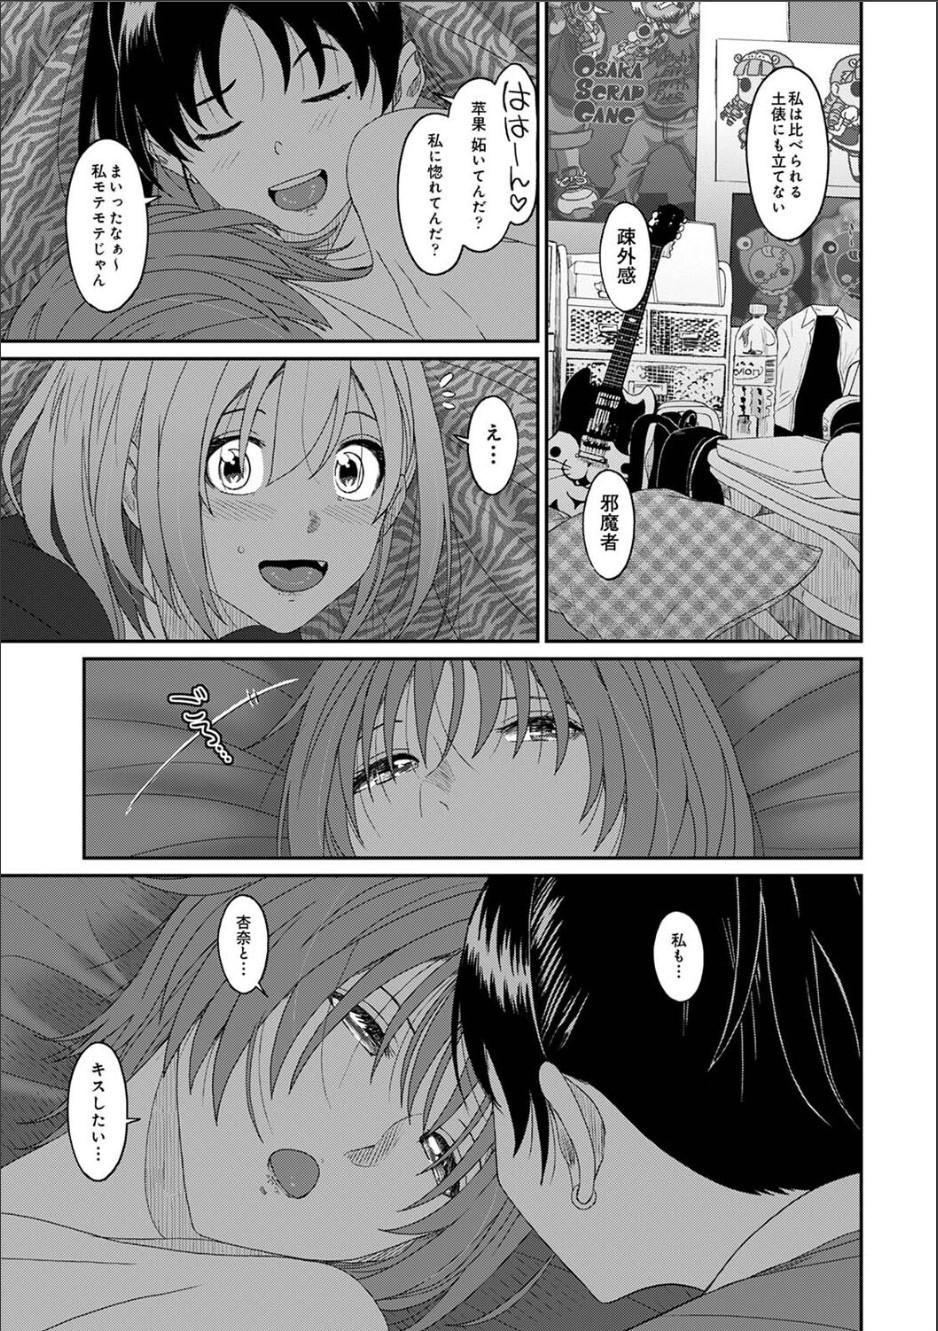 Gang Itaiamai ch. 14 Licking Pussy - Page 8